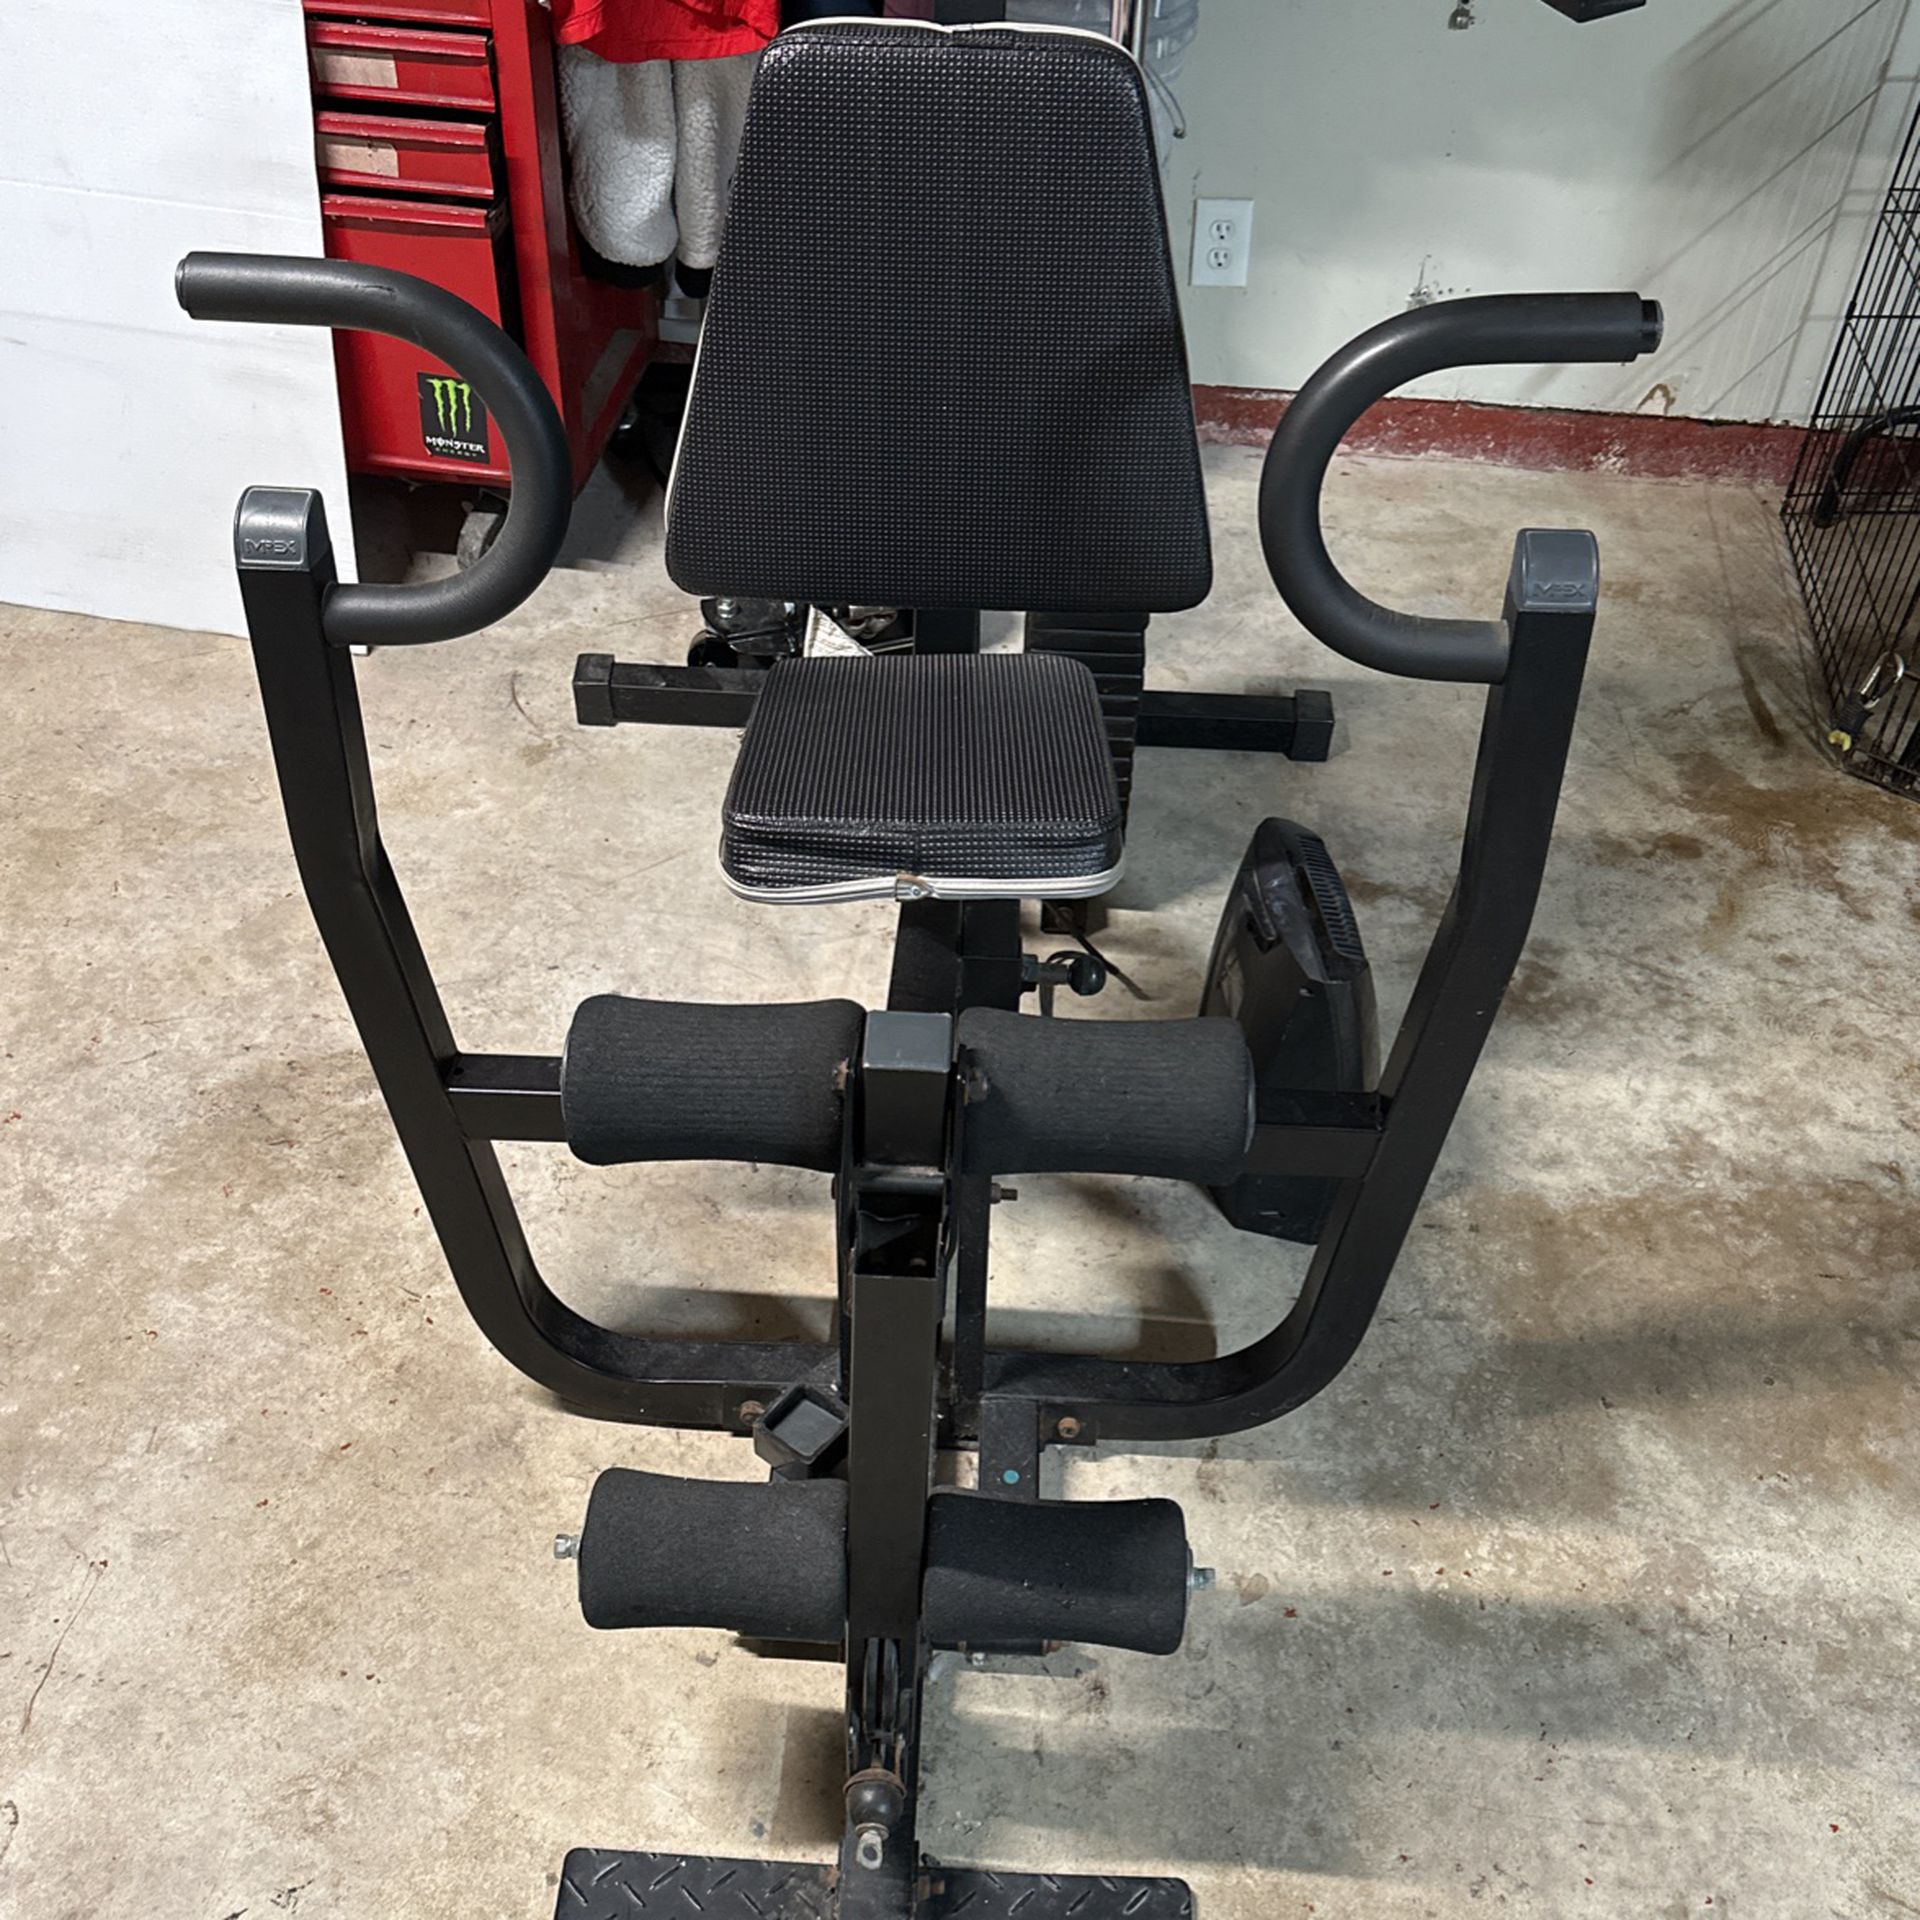 MARCY BY IMPEX HOME GYM